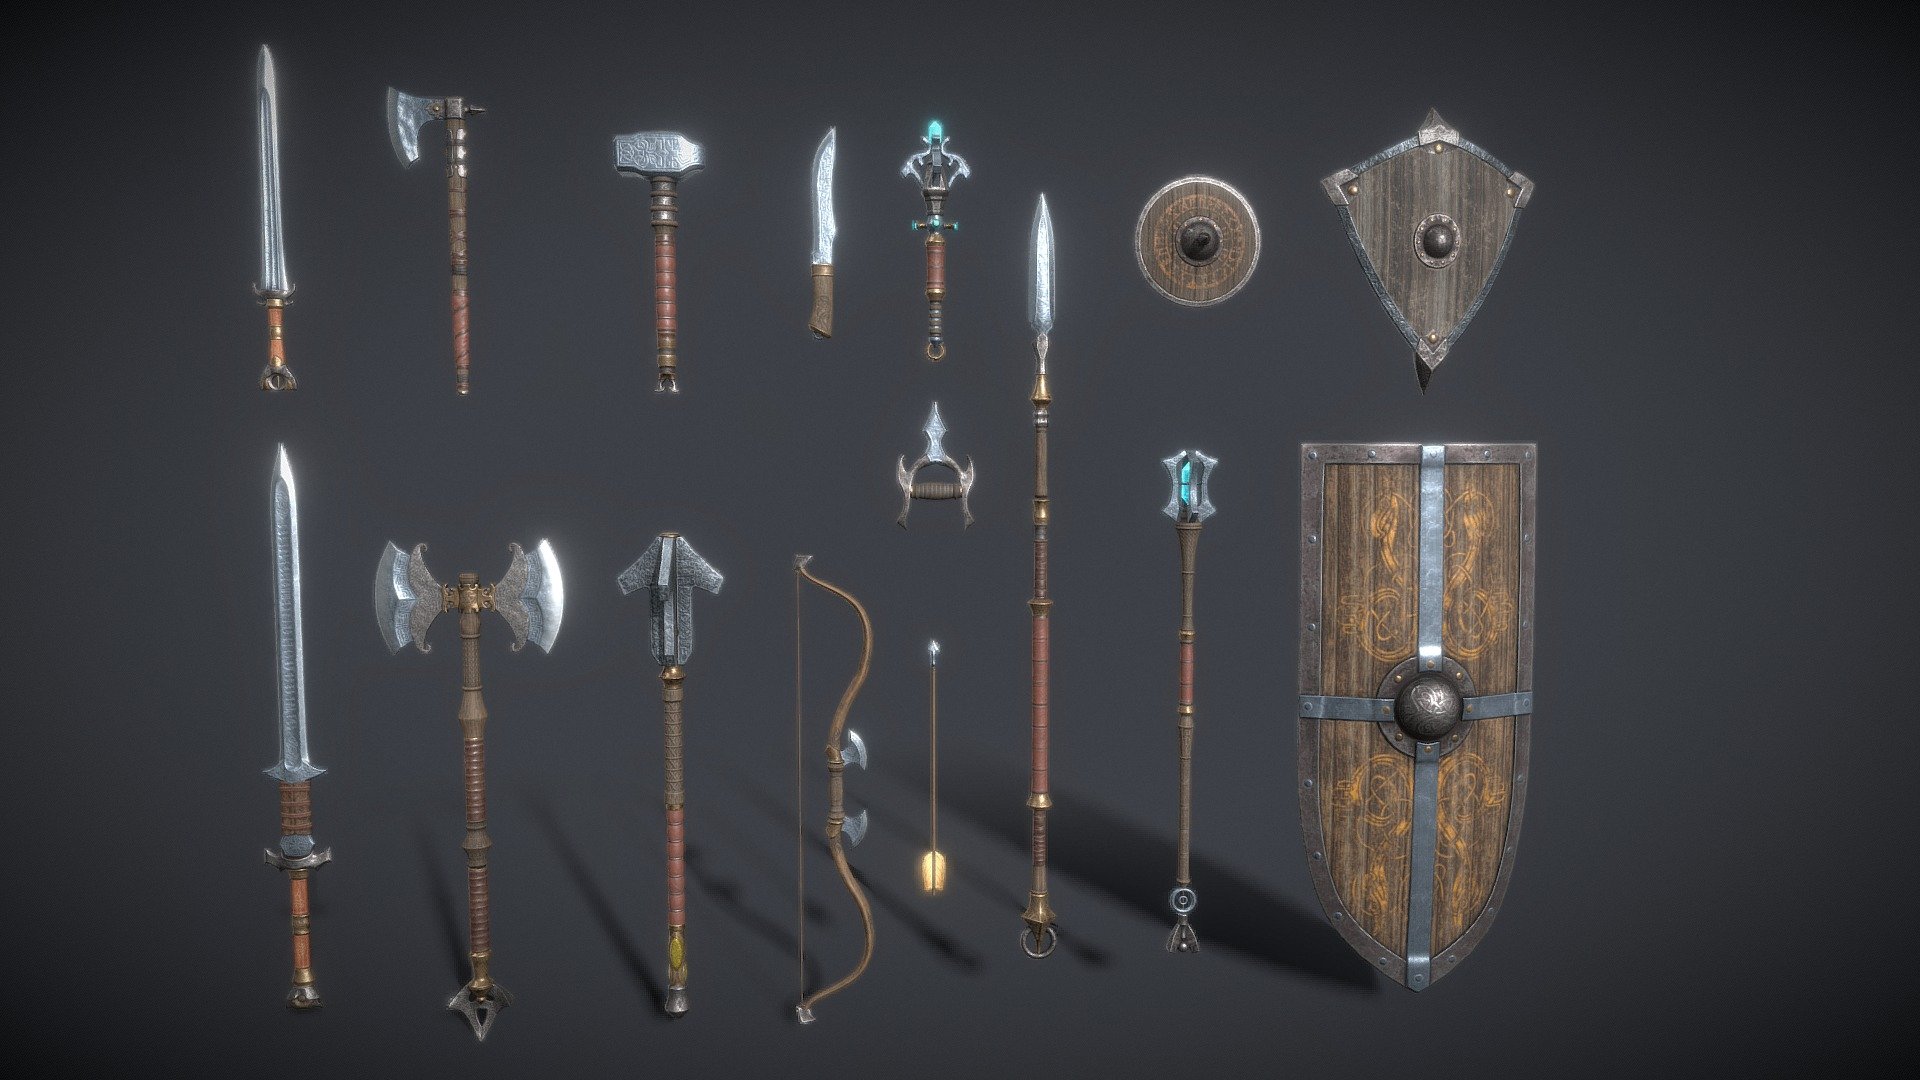 A set of fantasy Nordic weapons.

The set consists of sixteen unique objects.

PBR textures have a resolution of 2048x2048.

Total polygons: 45806 triangles; 23210 vertices.

1) Sword (one-handed) - 2448 tris

2) Sword (two-handed) - 3798 tris

3) Mace (one-handed) - 2794 tris

4) Mace (two-handed) - 3524 tris

5) Ax (one-handed) - 3160 tris

6) Ax (two-handed) - 4968 tris

7) Lance - 3092 tris

8) Dagger - 910 tris

9) Brass knuckles - 2528 tris

10) Bow - 2856 tris

11) Staff - 4100 tris

12) Scepter - 4808 tris

13) Shield (small) - 2064 tris

14) Shield (medium) - 2002 tris

15) Shield (great) - 2366 tris

16) Arrow - 388 tris

Archives with textures contain:

PNG textures for blender - base color, metallic, normal, roughness, opacity, glow

Texturing Unity (Metallic Smoothness) - AlbedoTransparency, MetallicSmoothness, Normal, Emission

Texturing Unreal Engine - BaseColor, Normal, OcclusionRoughnessMetallic, Emissive - Nordic Fantasy Weapon Set - 3D model by zilbeerman 3d model